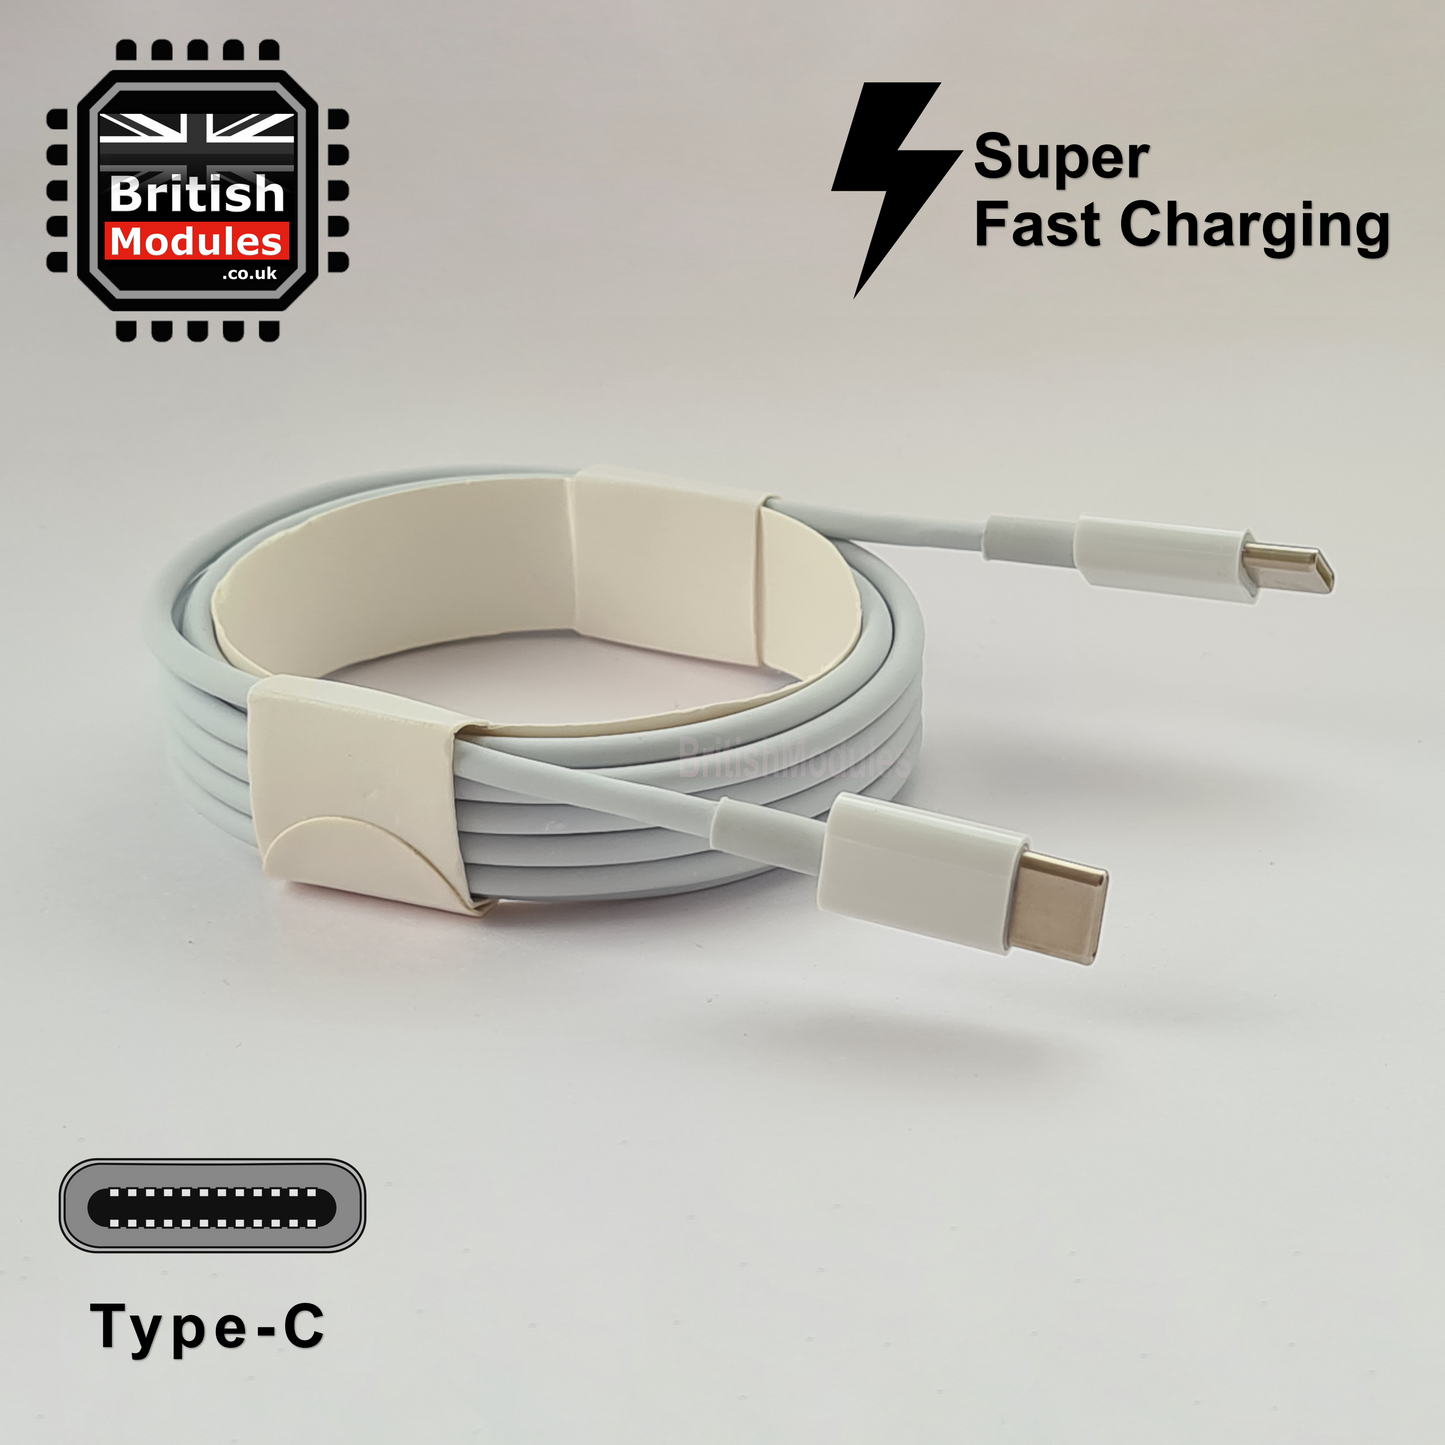 2M USB C to USB C Charge Cable Sync Cable for MacBook iPad iPhone Samsung